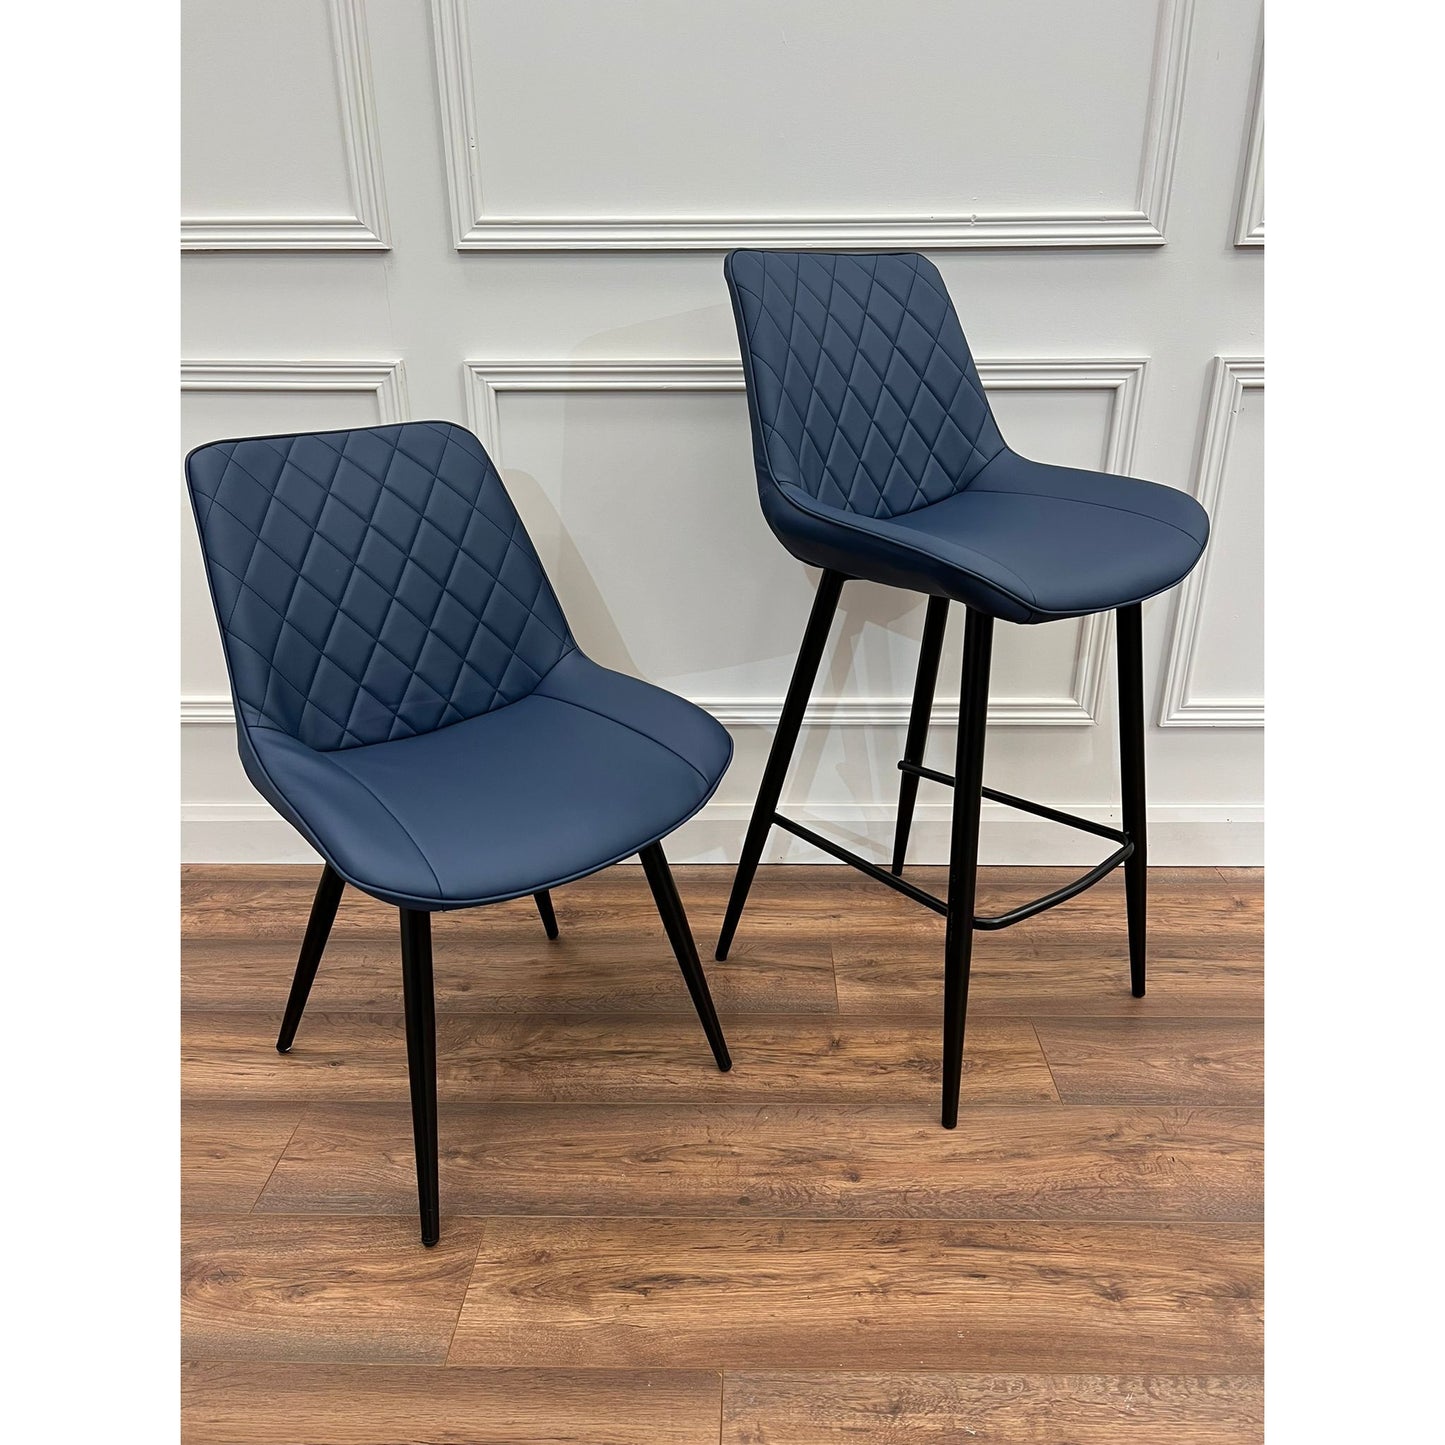 Selena - Navy leatherette Dining Chair